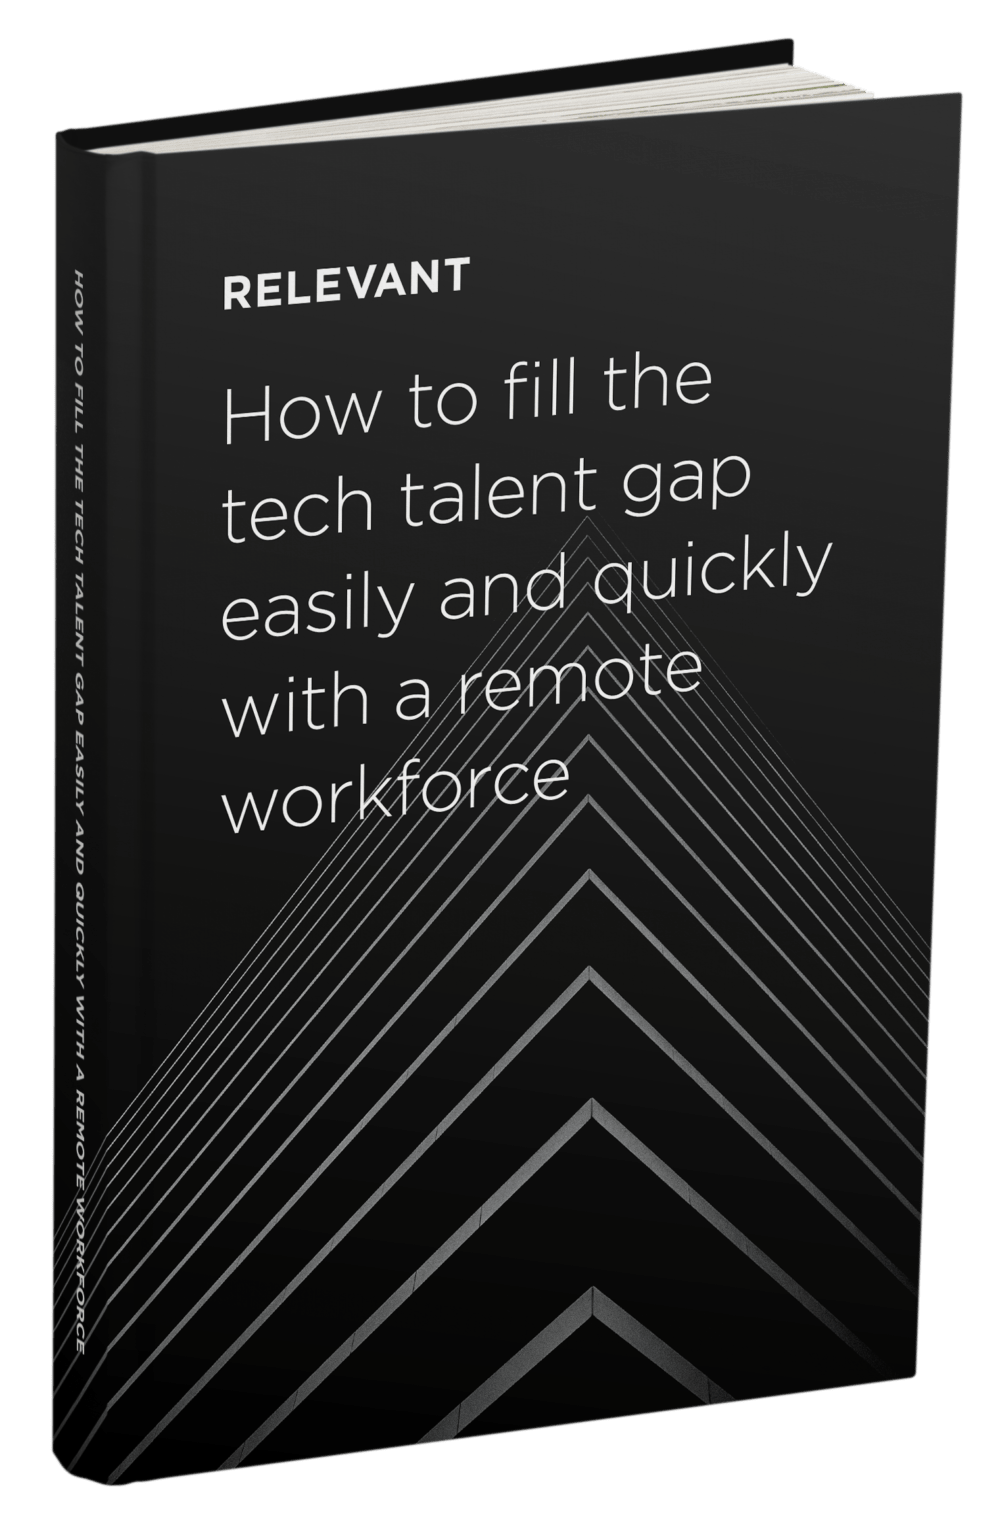 How to Tap Into Global Talent Pool to Fill Tech Positions Faster